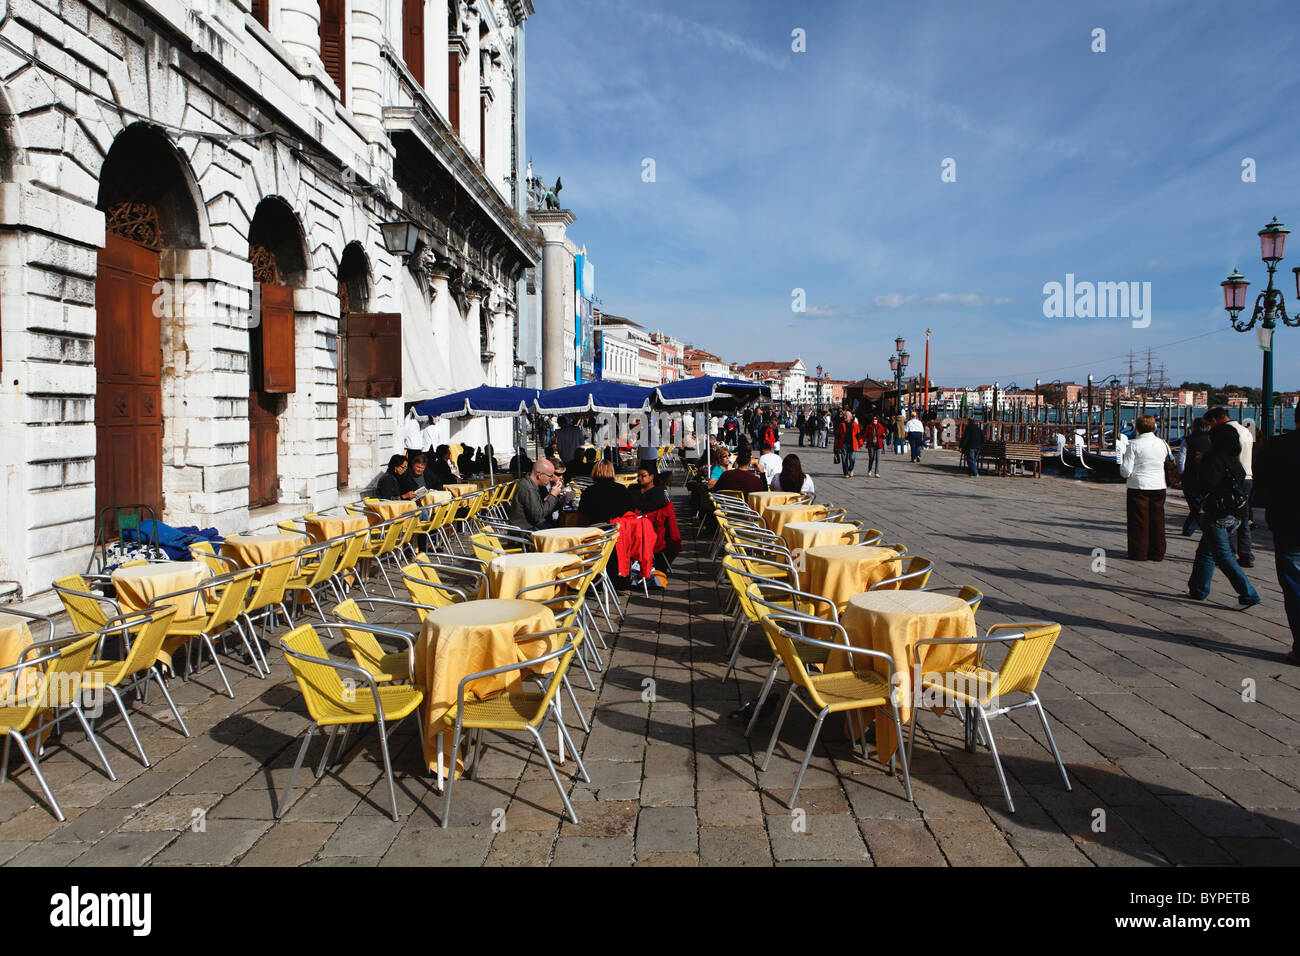 View of an Outdoor Cafe at St Mark's Square, Venice Italy Stock Photo